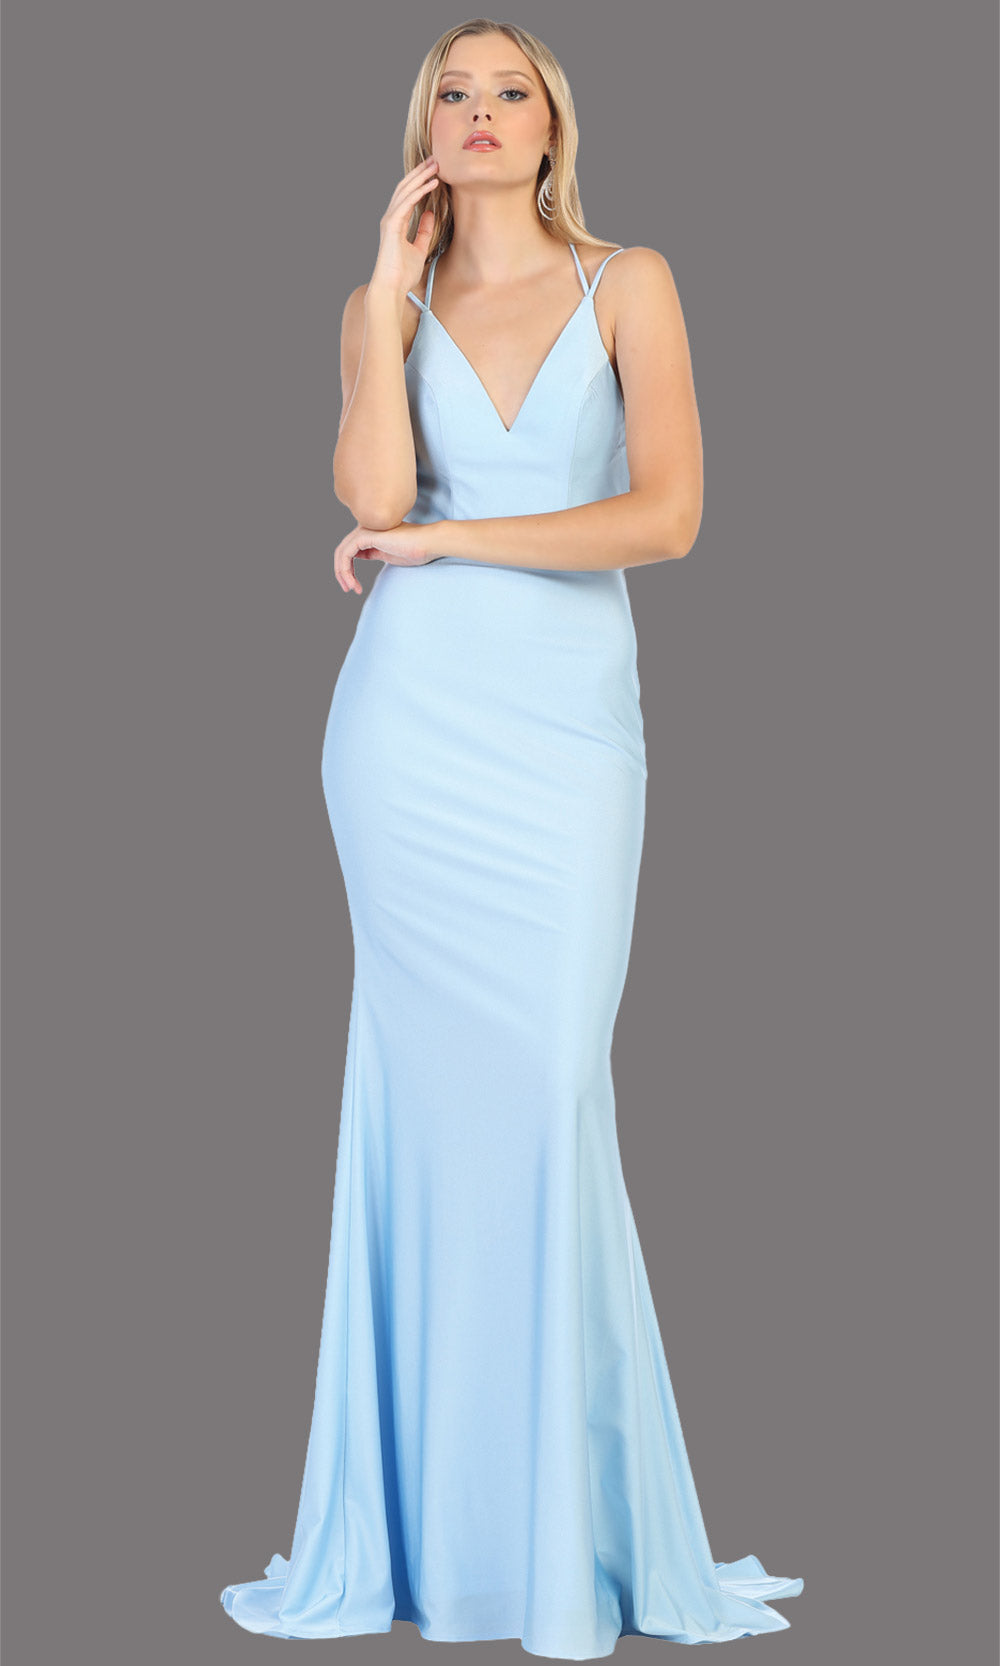 Mayqueen MQ1720 long perry blue sleek & sexy evening dress w/low v neck & open back dress. This tight fitted dress is perfect for prom, sleek & sexy wedding guest dress, gala, engagement/e-shoot dress, bridesmaid dresses, formal evening party dress